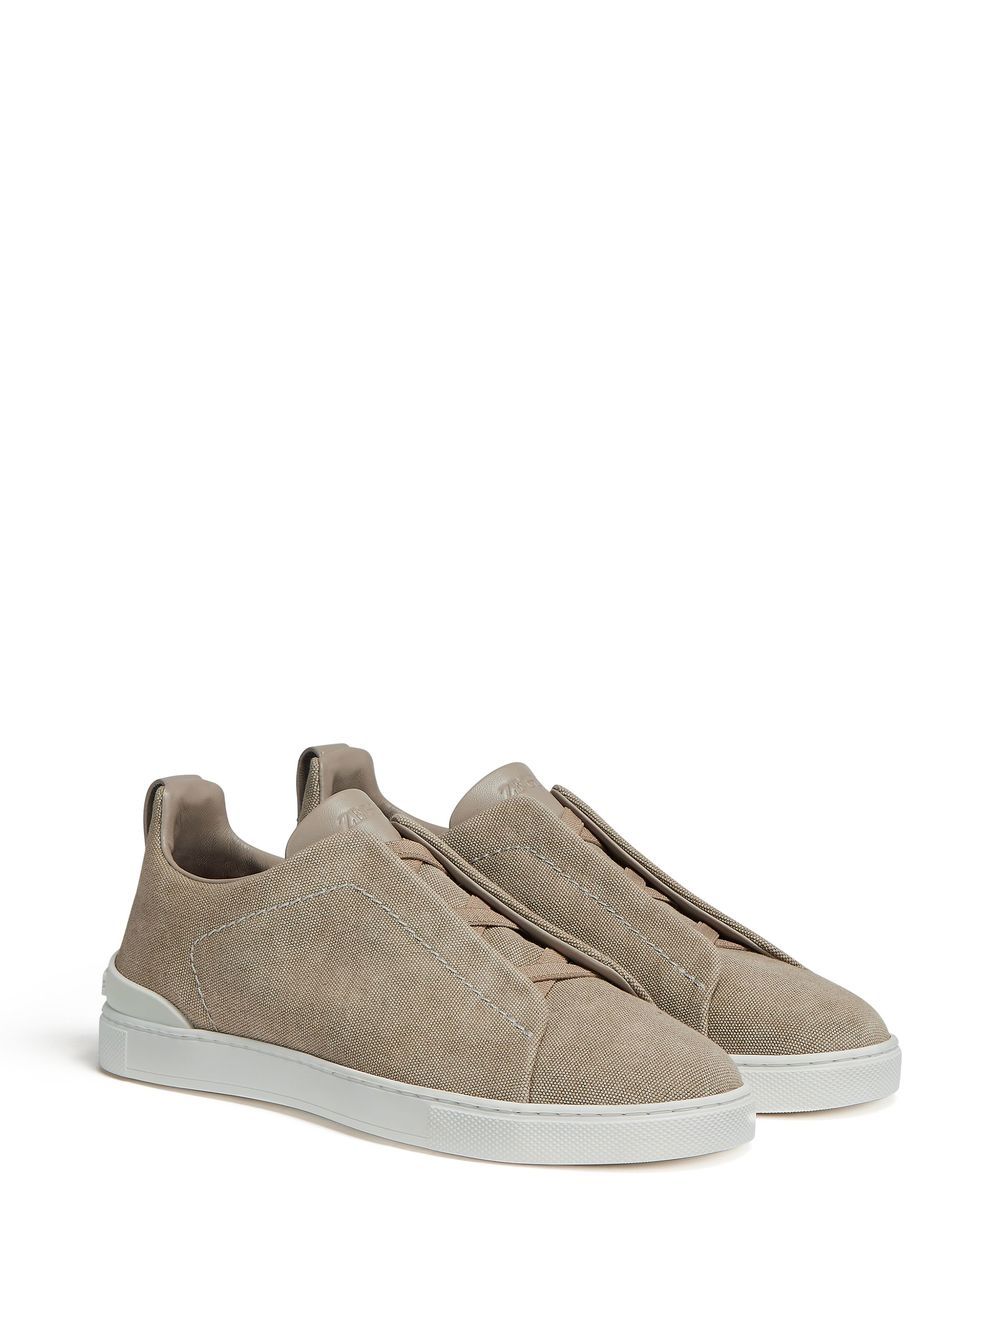 Image 2 of Zegna Triple Stitch canvas sneakers